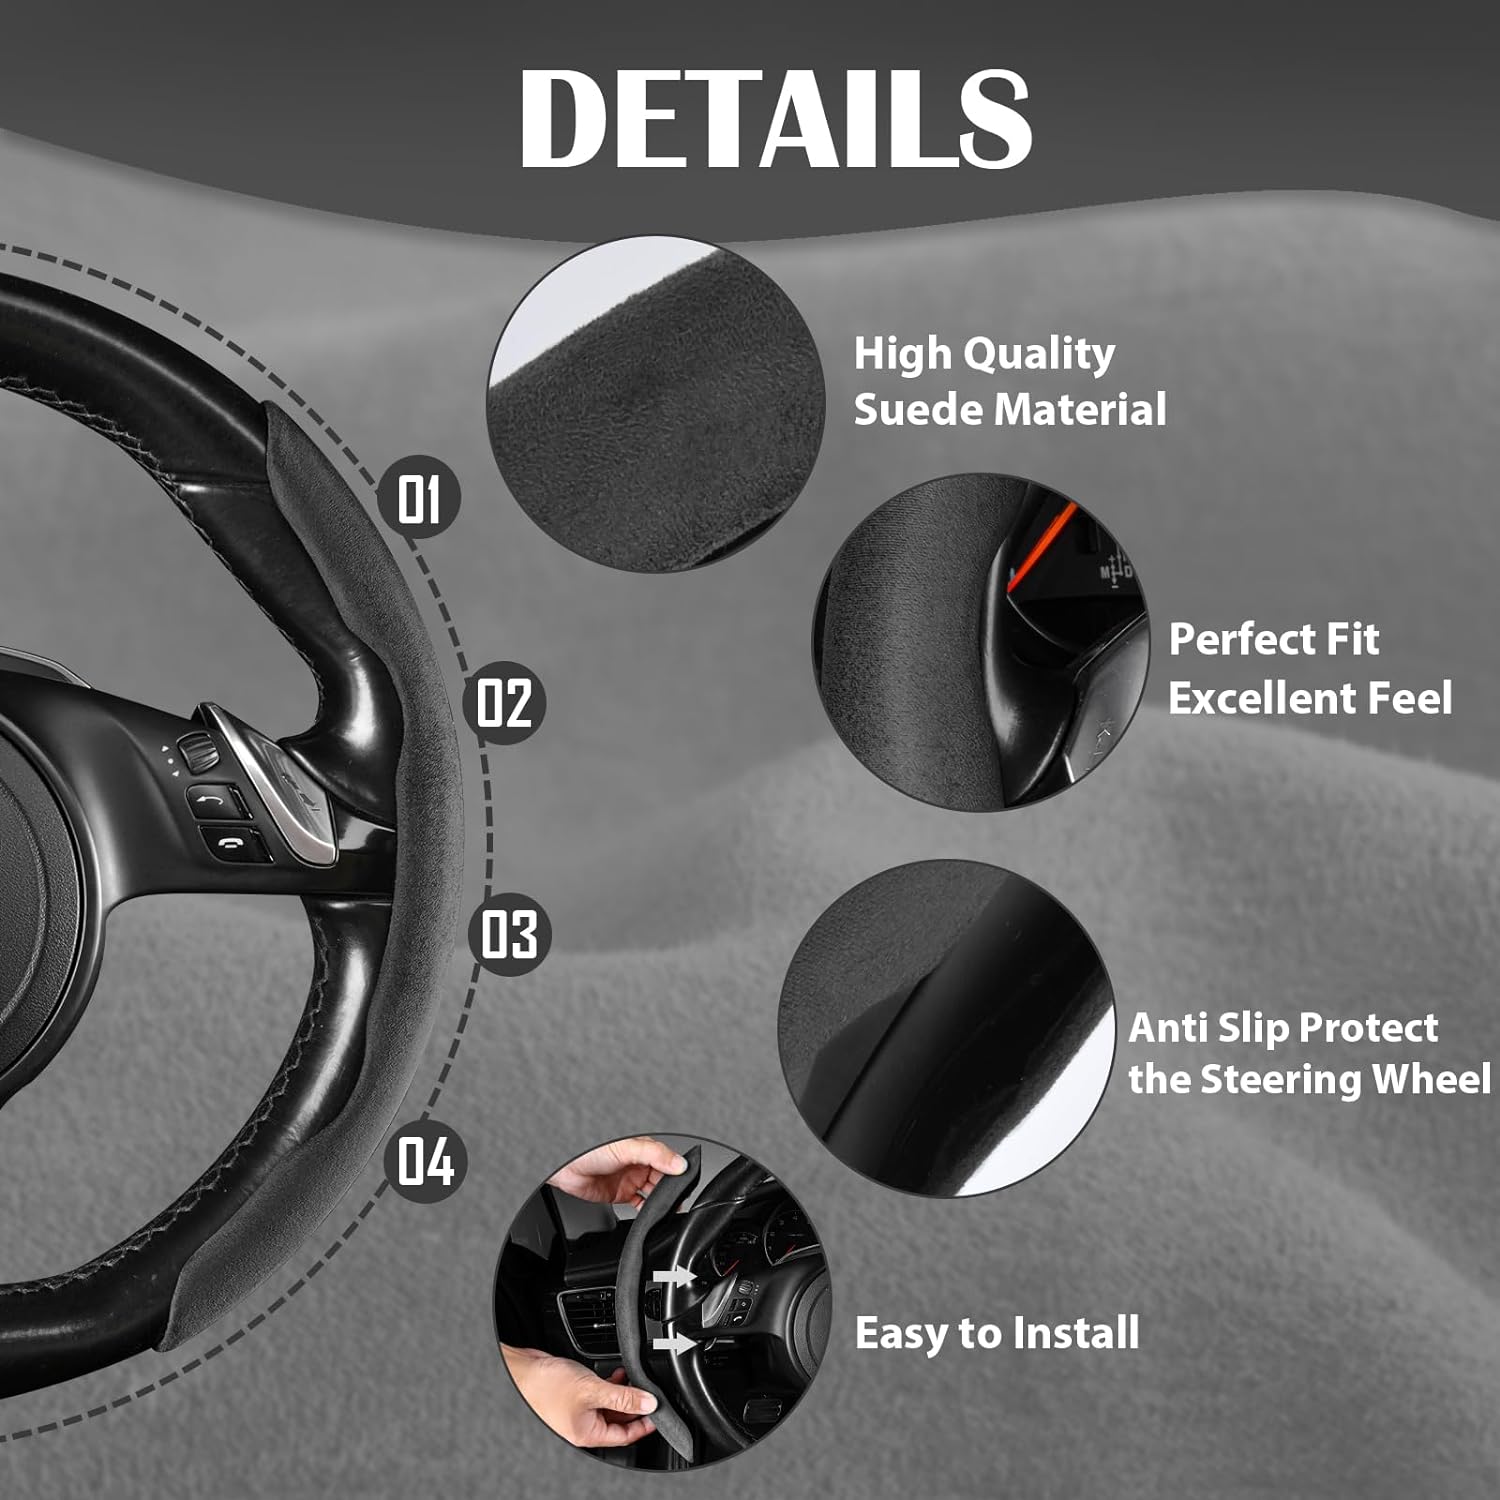 CAR PASS Carbon Fiber Steering Wheel Cover, Segmented Wheel Protector Non-Slip Sporty Car Accessories, Universal Fit for D-Shape O-Shape 14.5